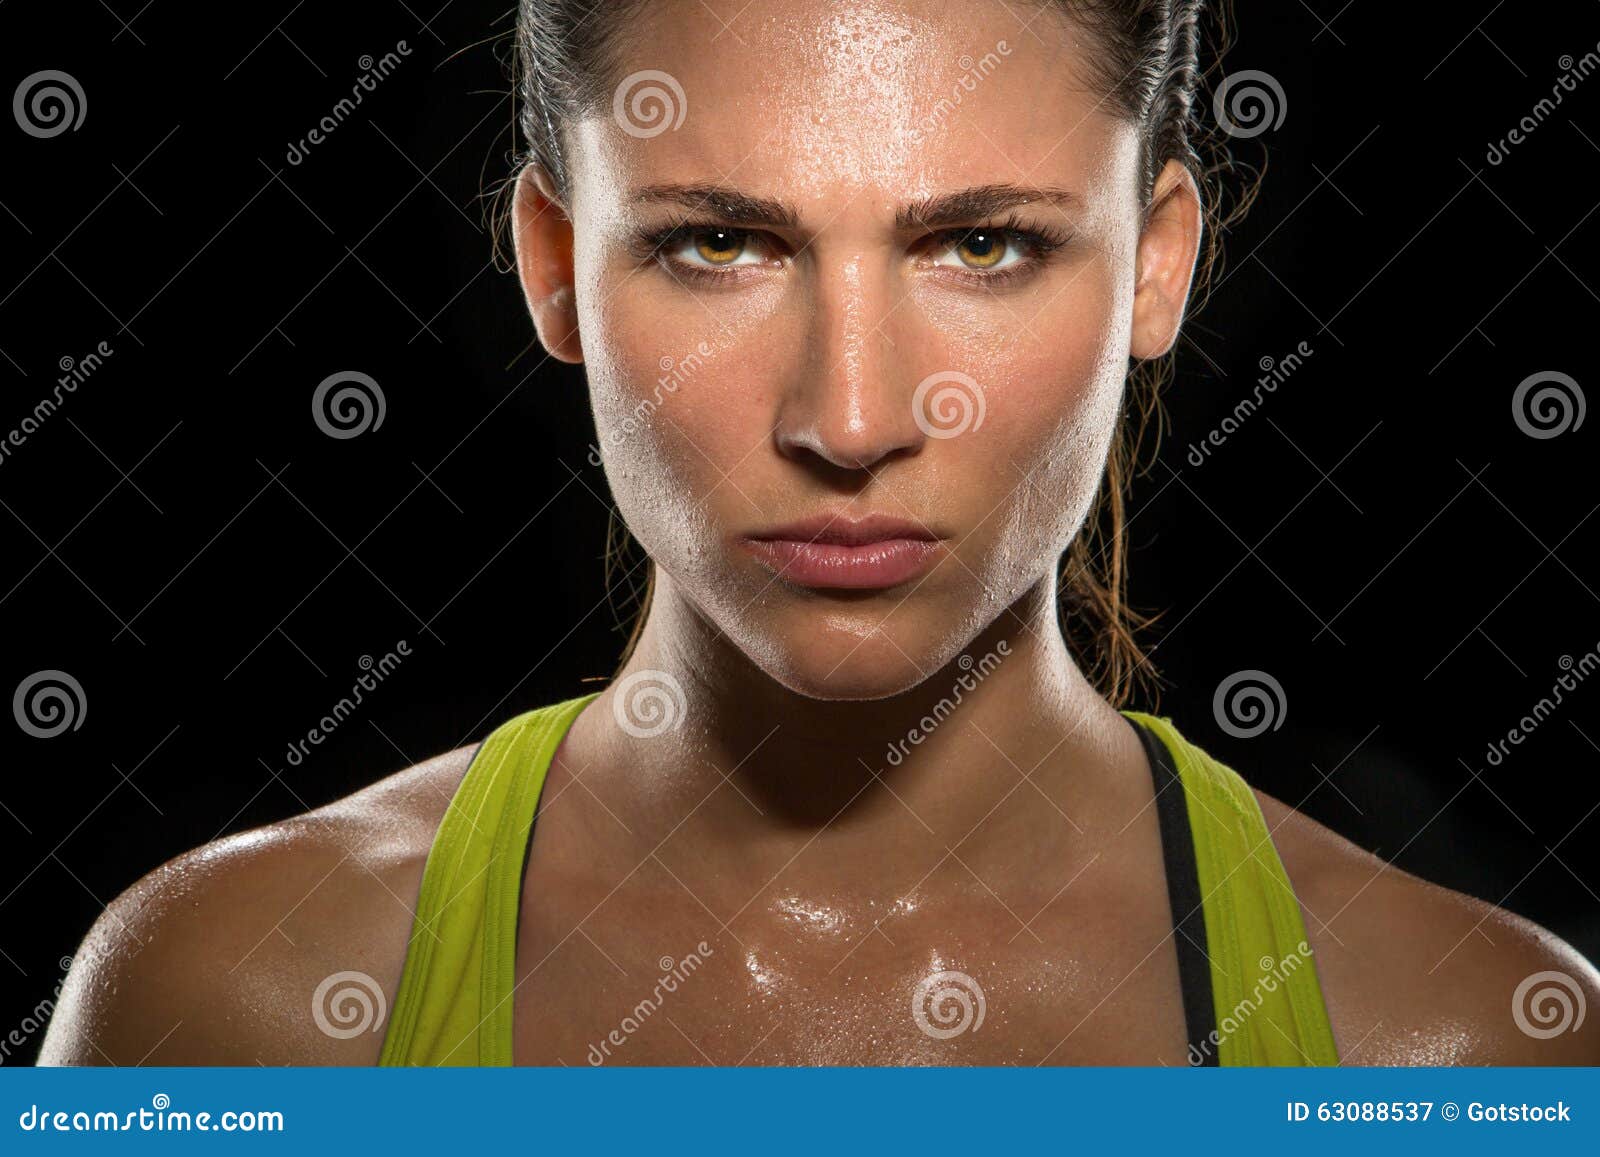 intense stare eyes determined athlete champion glare head shot sweaty confident woman female powerful fighter close up